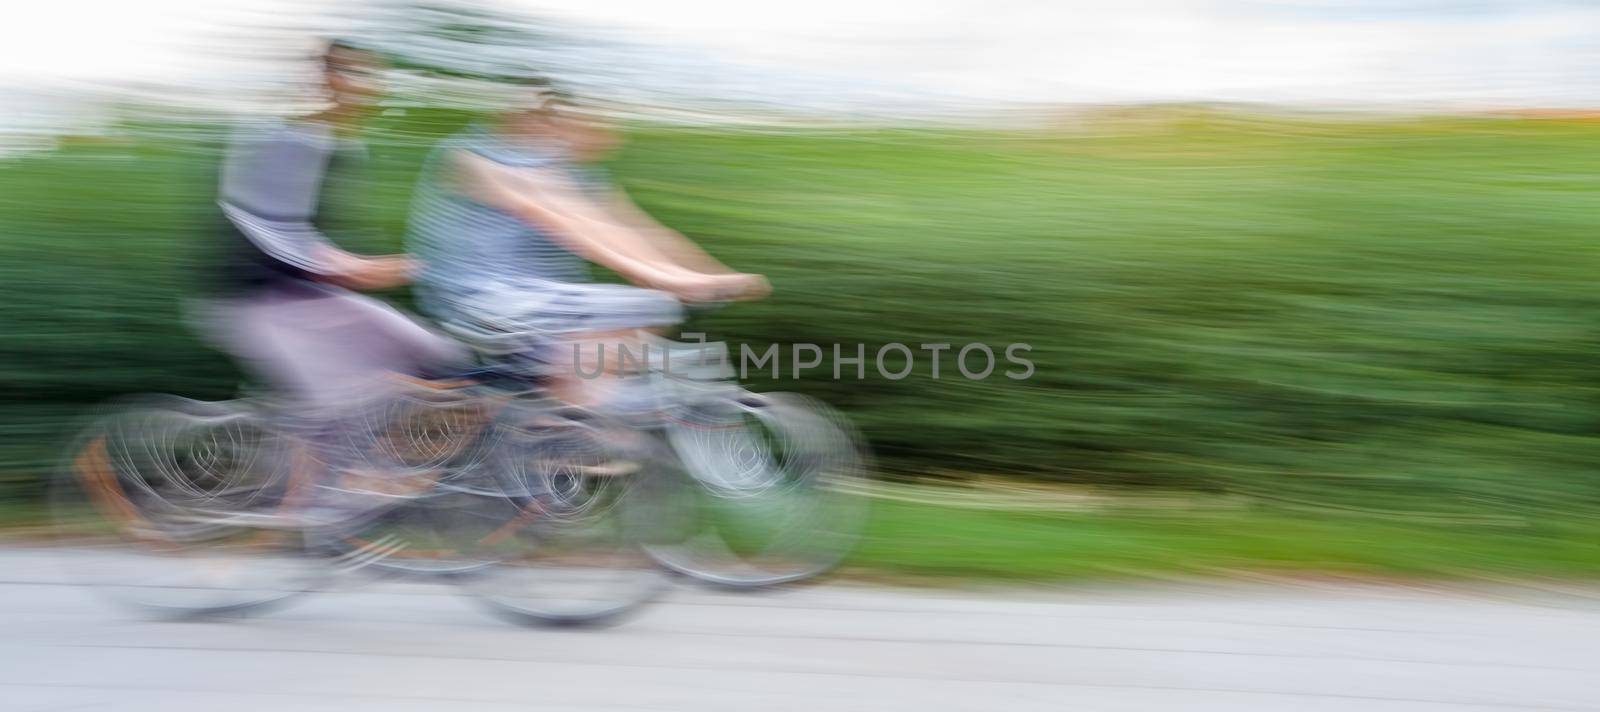 Two teenagers cyclists in traffic on the city roadway. Intentional motion blur